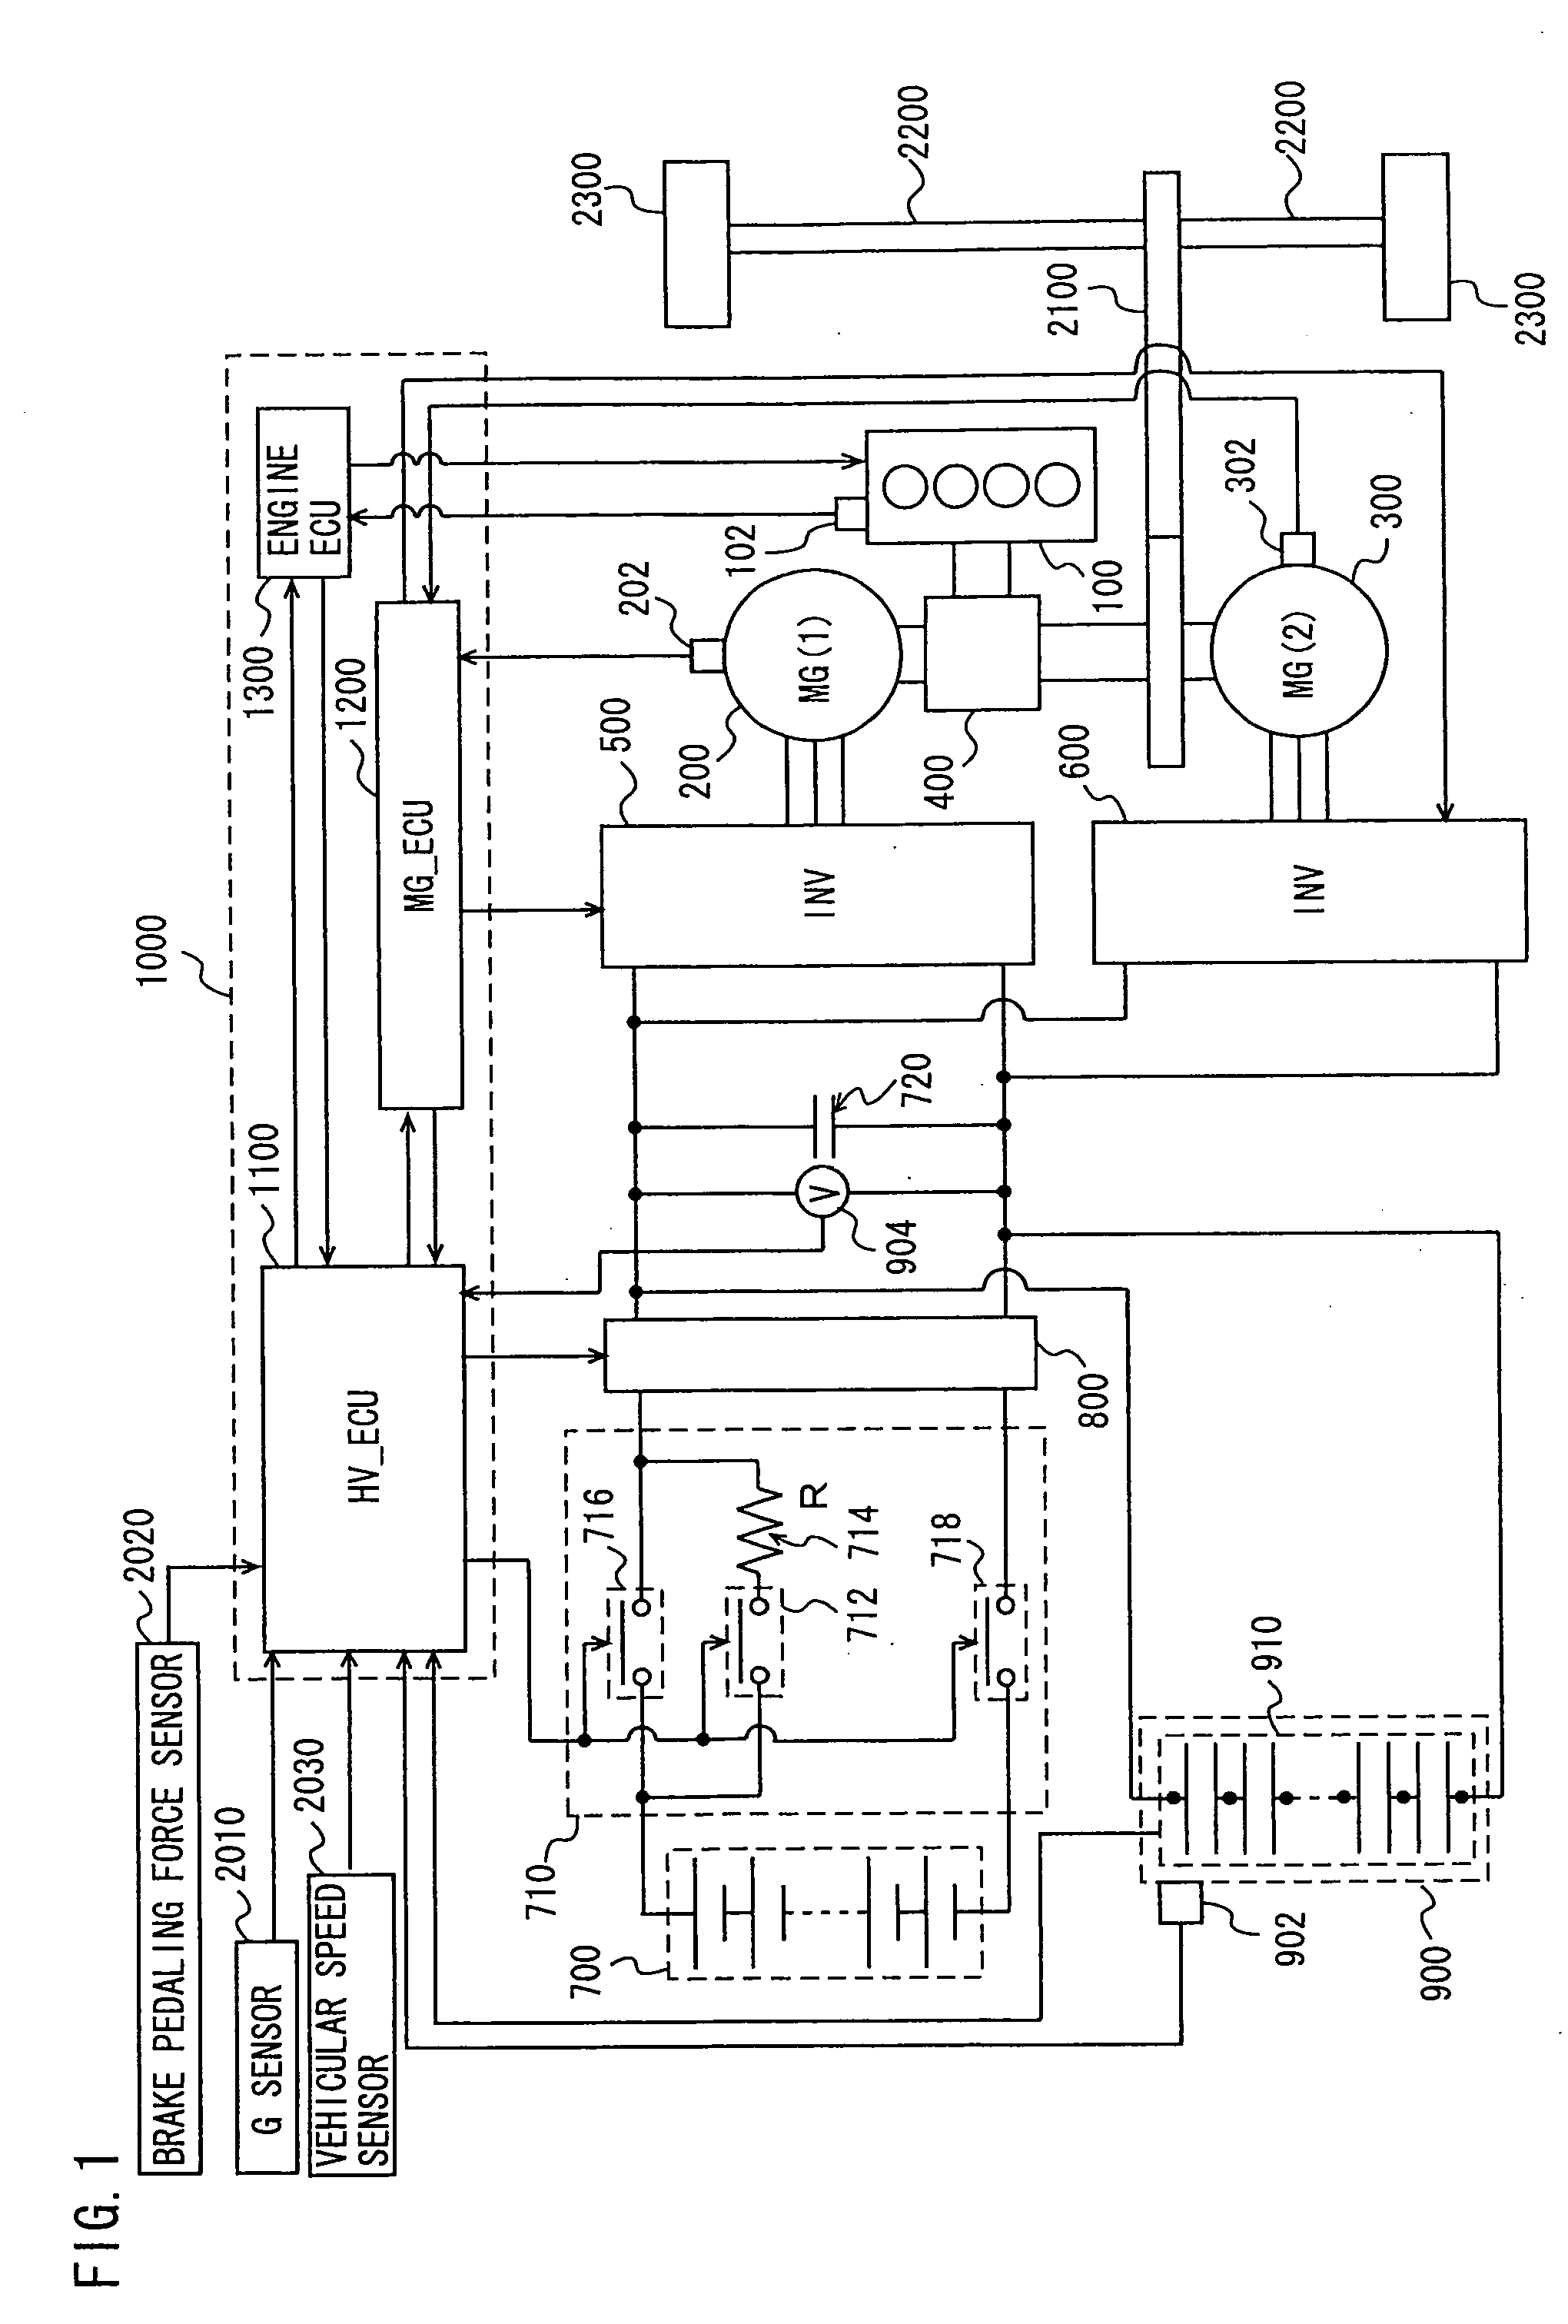 Drive Device for Vehicle